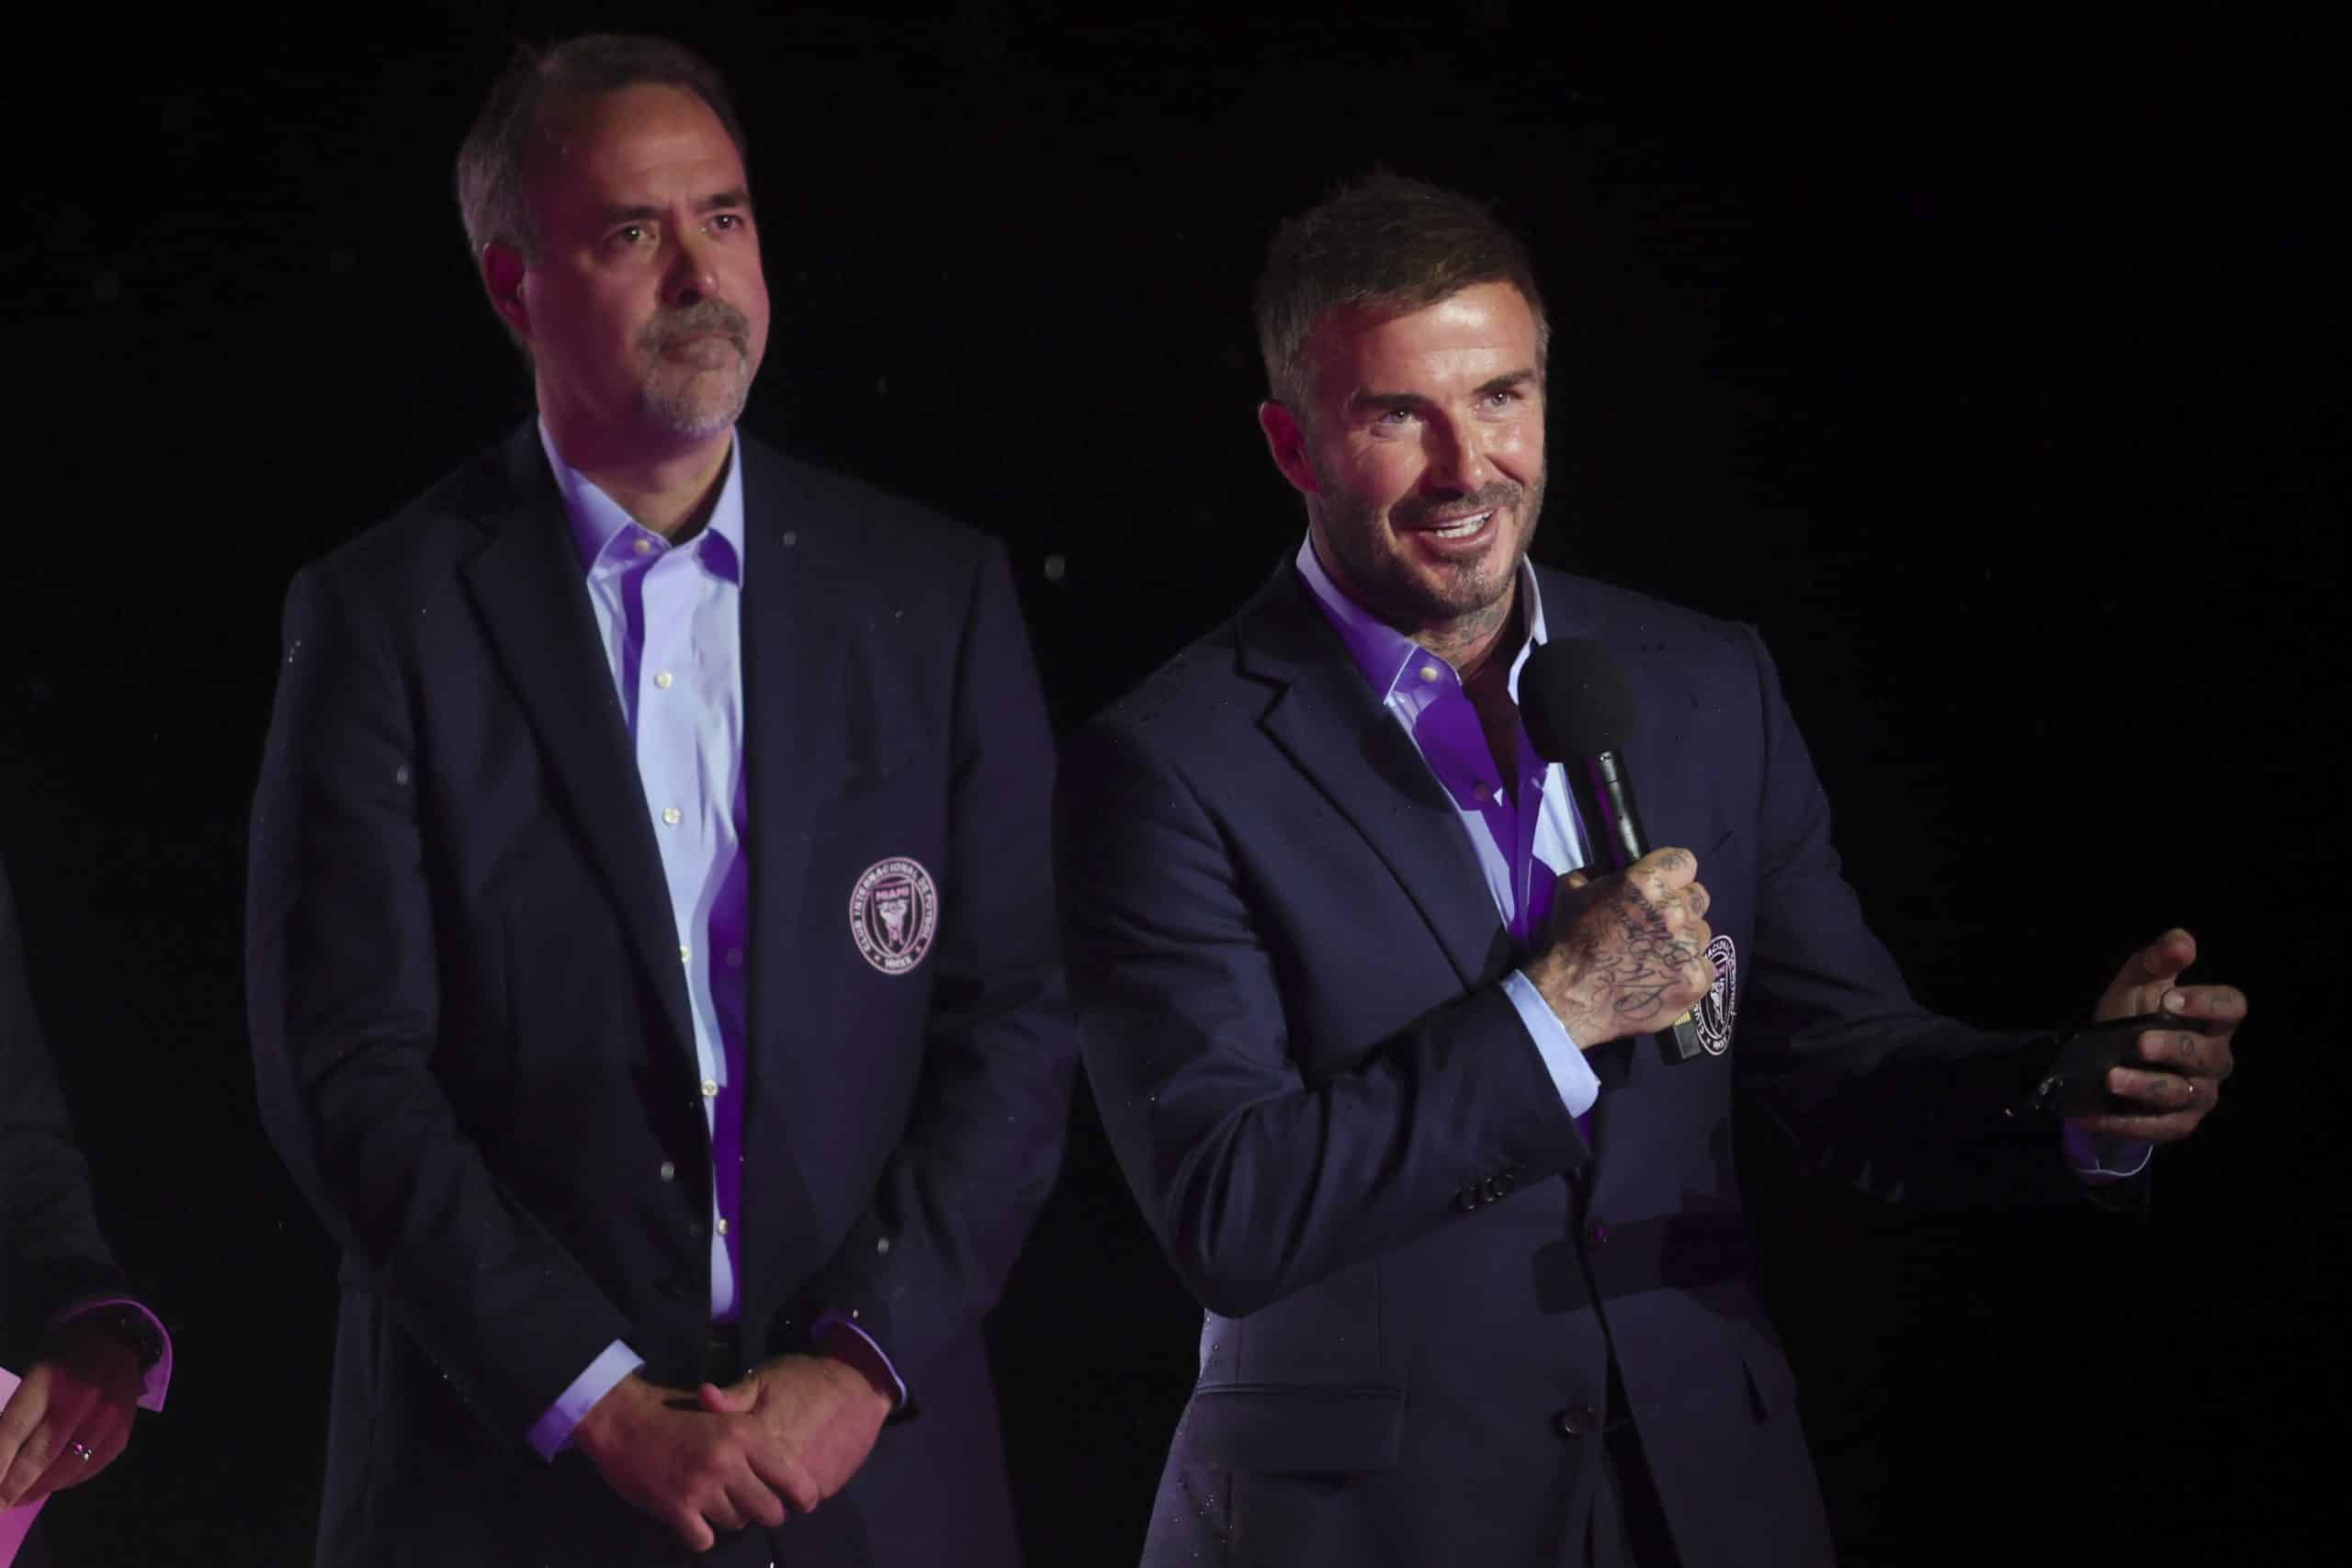 David Beckham Sues Fitness Franchise For More Than $20 Million